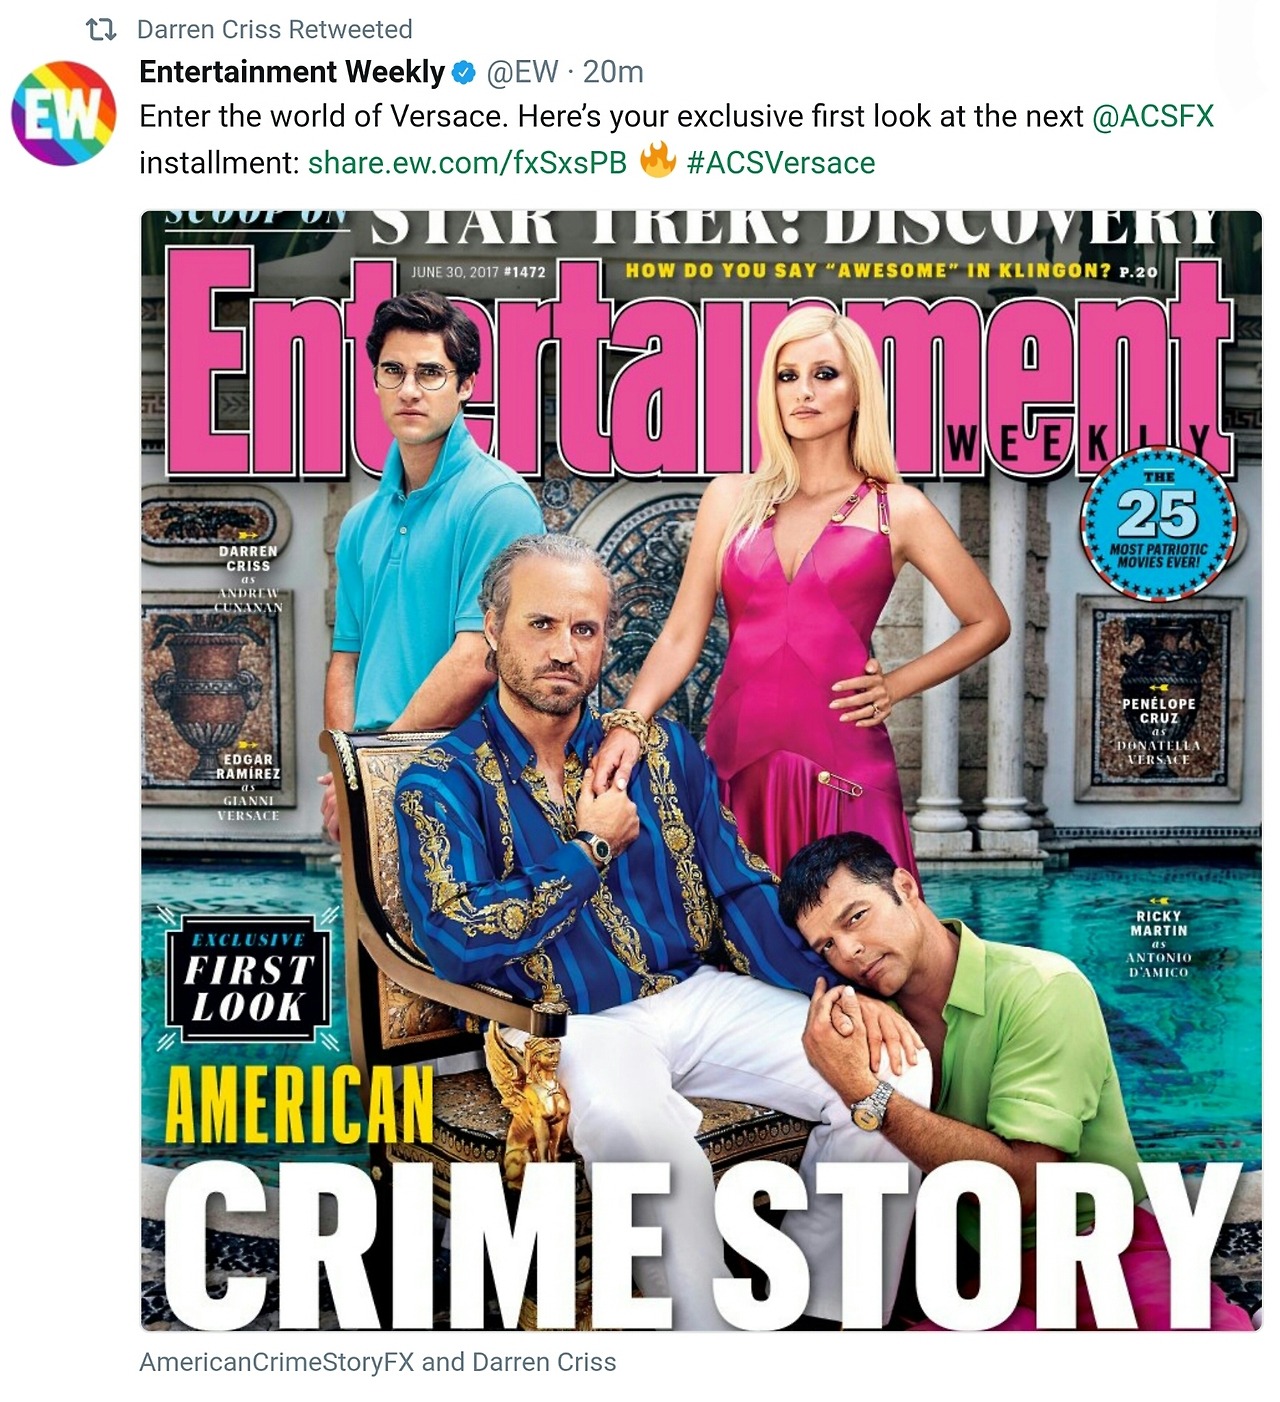 goldenglobes - The Assassination of Gianni Versace:  American Crime Story - Page 4 Tumblr_orwr4oVYBi1wpi2k2o1_1280